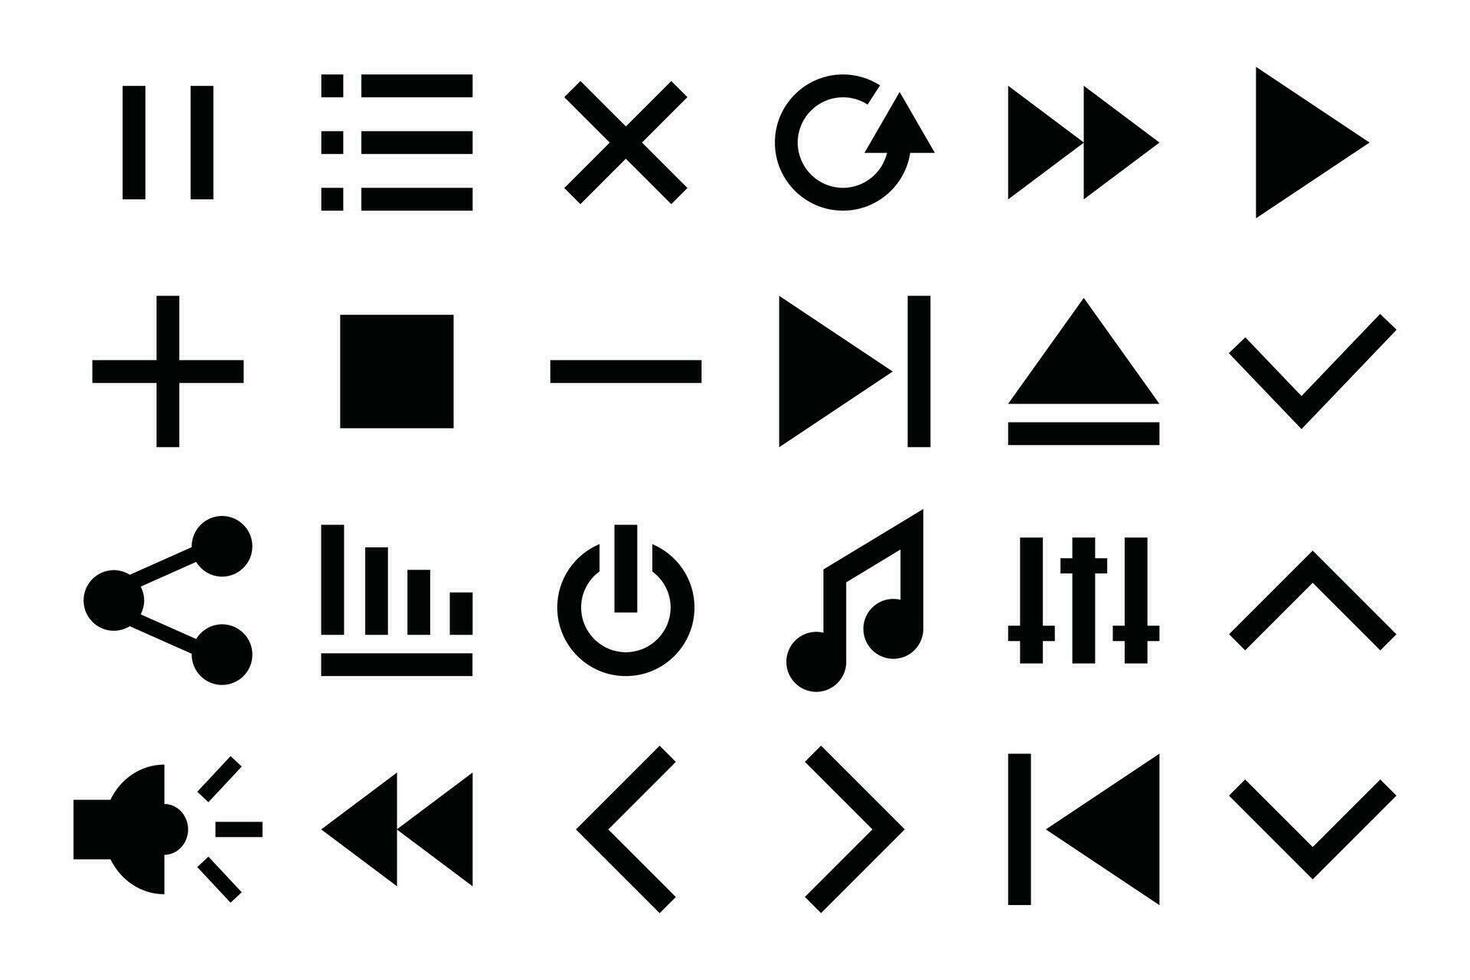 Music play button icons fill perfect. The collection includes for media player icons, music, interface, design media player buttons, Ui design and etc. vector